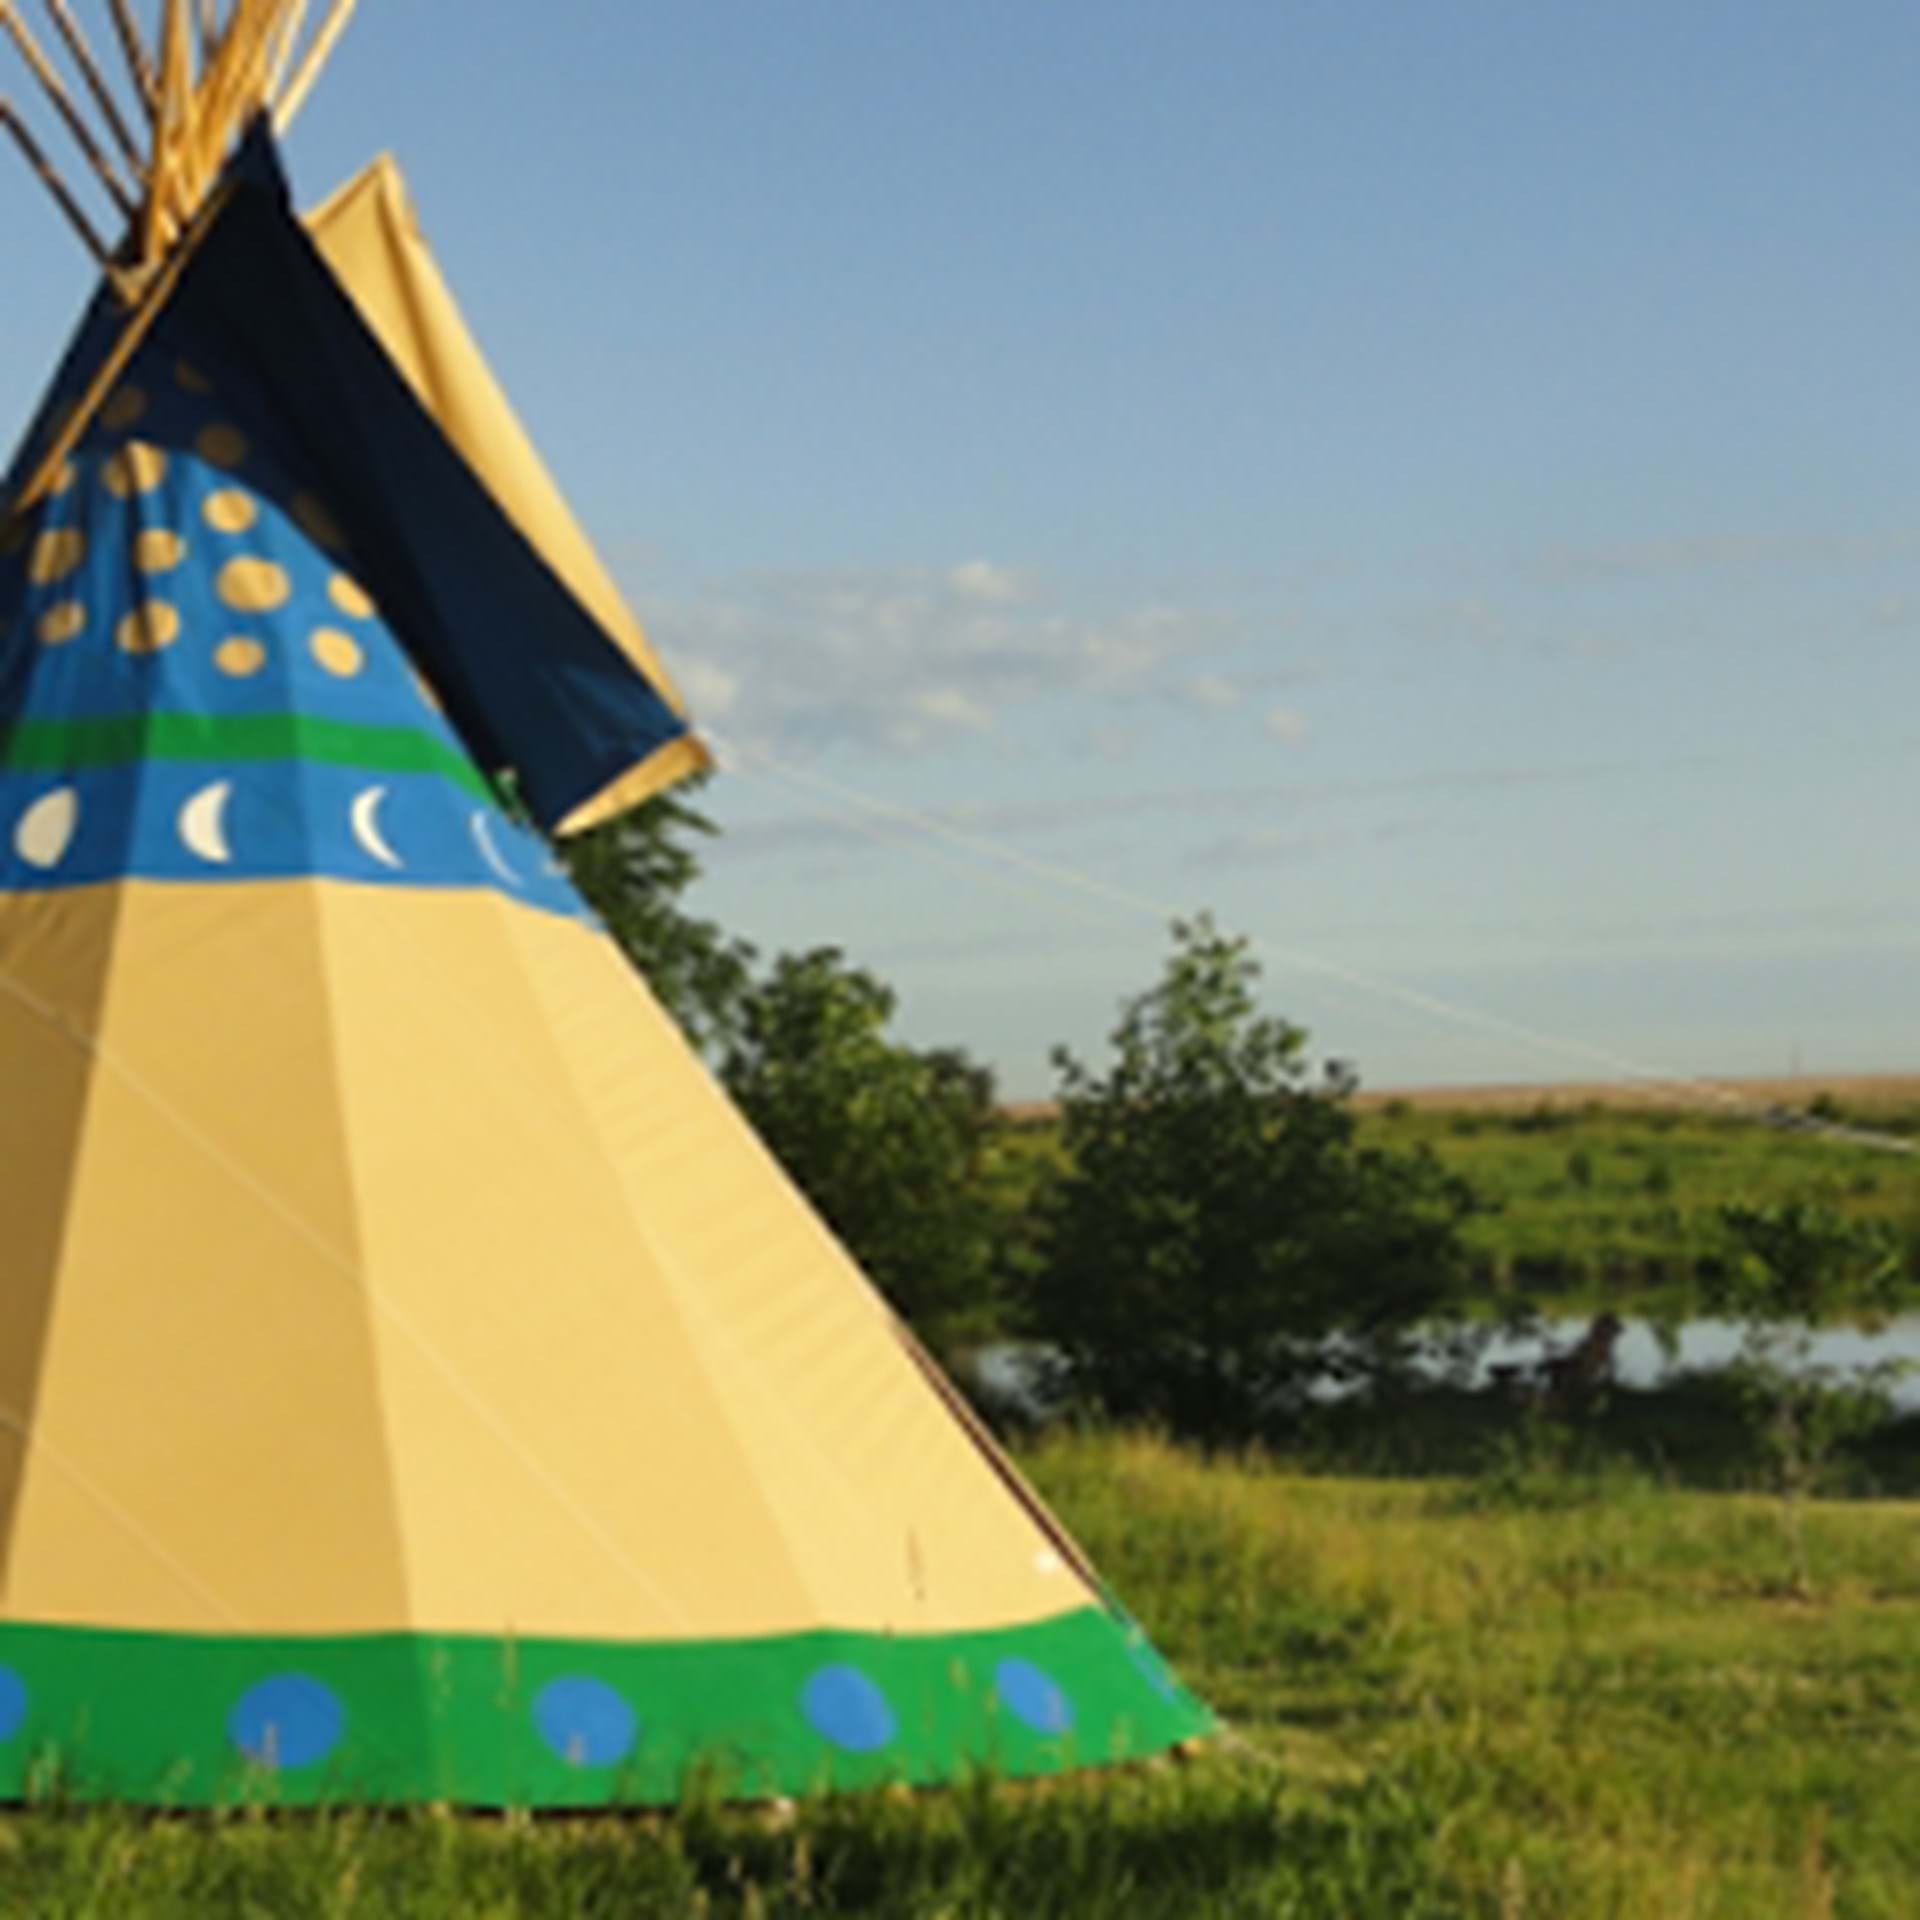 Our tipi sleeps 4-6 comfortably, up to 10 smaller campers.